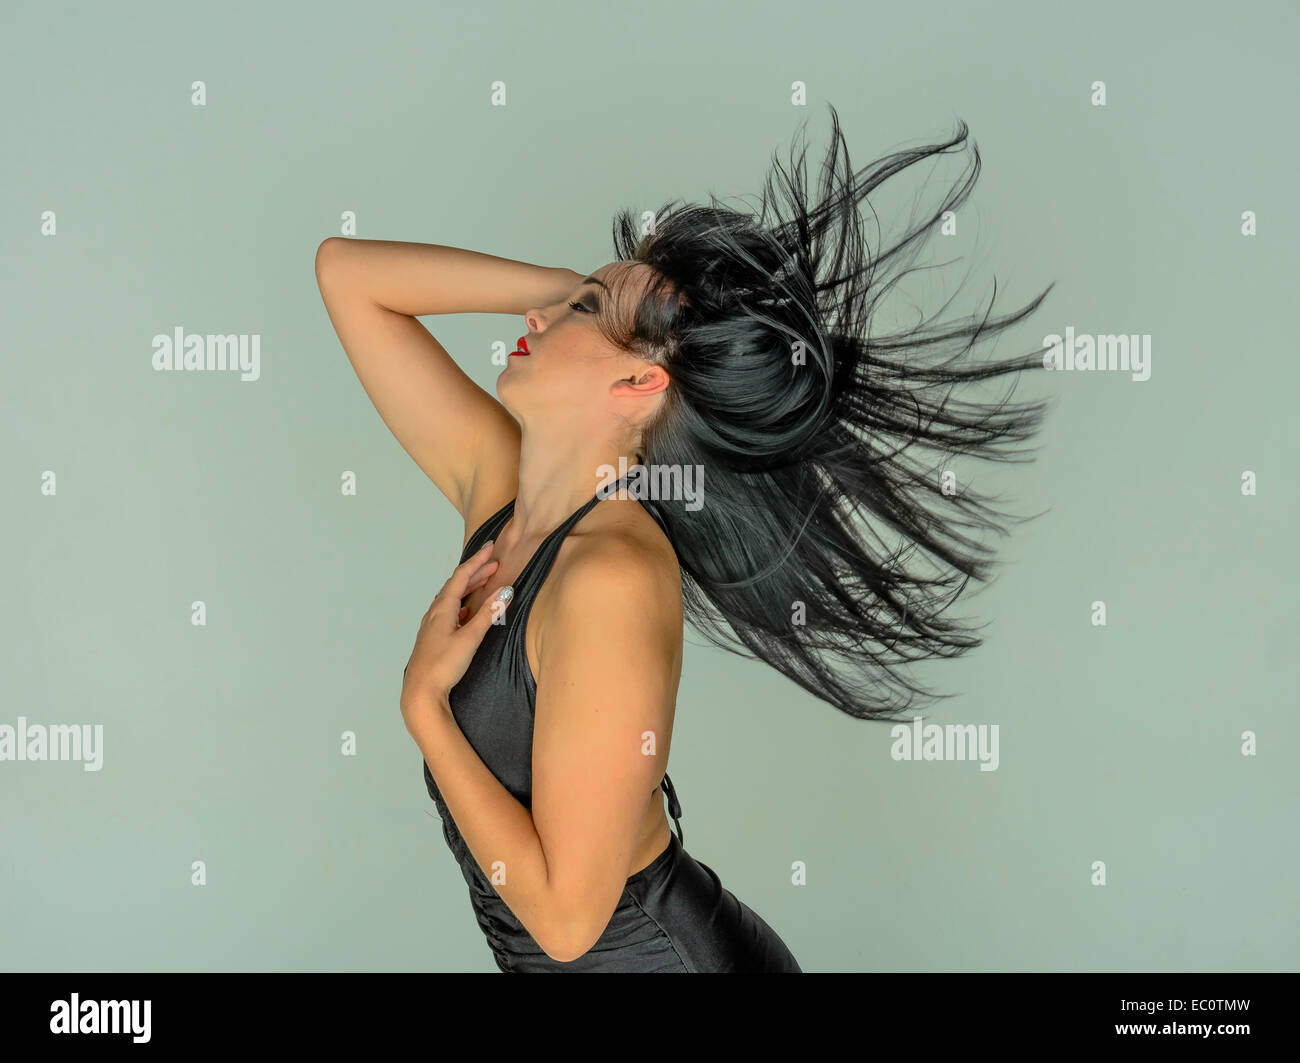 Young female model enjoying a moment. Stock Photo